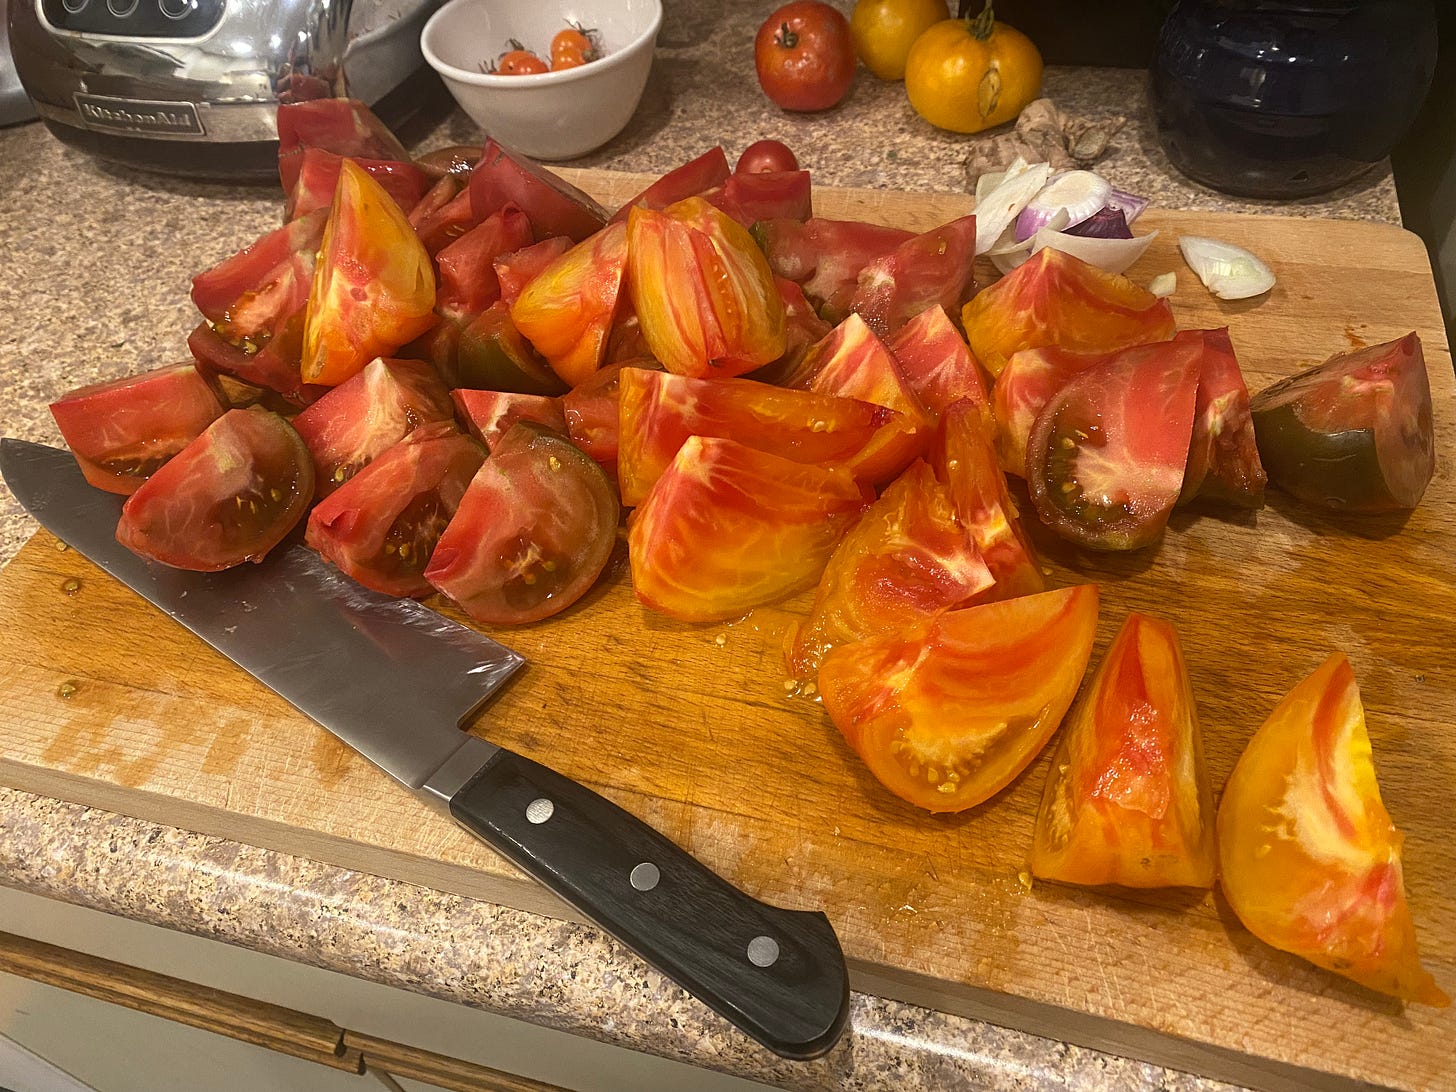 A wooden cutting board full of heirloom tomatoes cut into thick wedges. The knife is tucked under a few of them at the bottom left corner. In the upper right corner are scraps of onion.